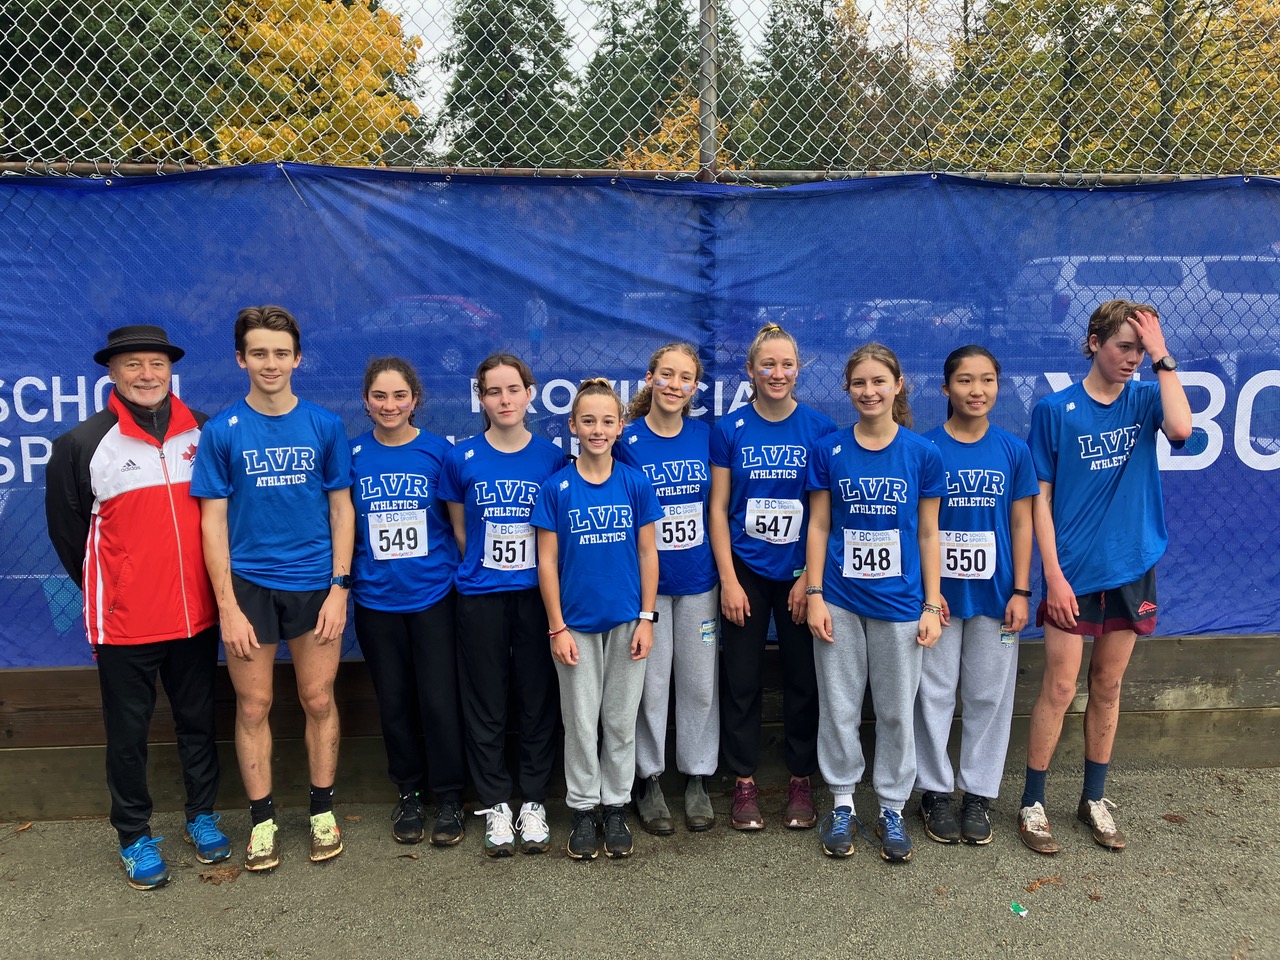 Bombers Senior Girls claim Silver at BC High School Cross Country Championships